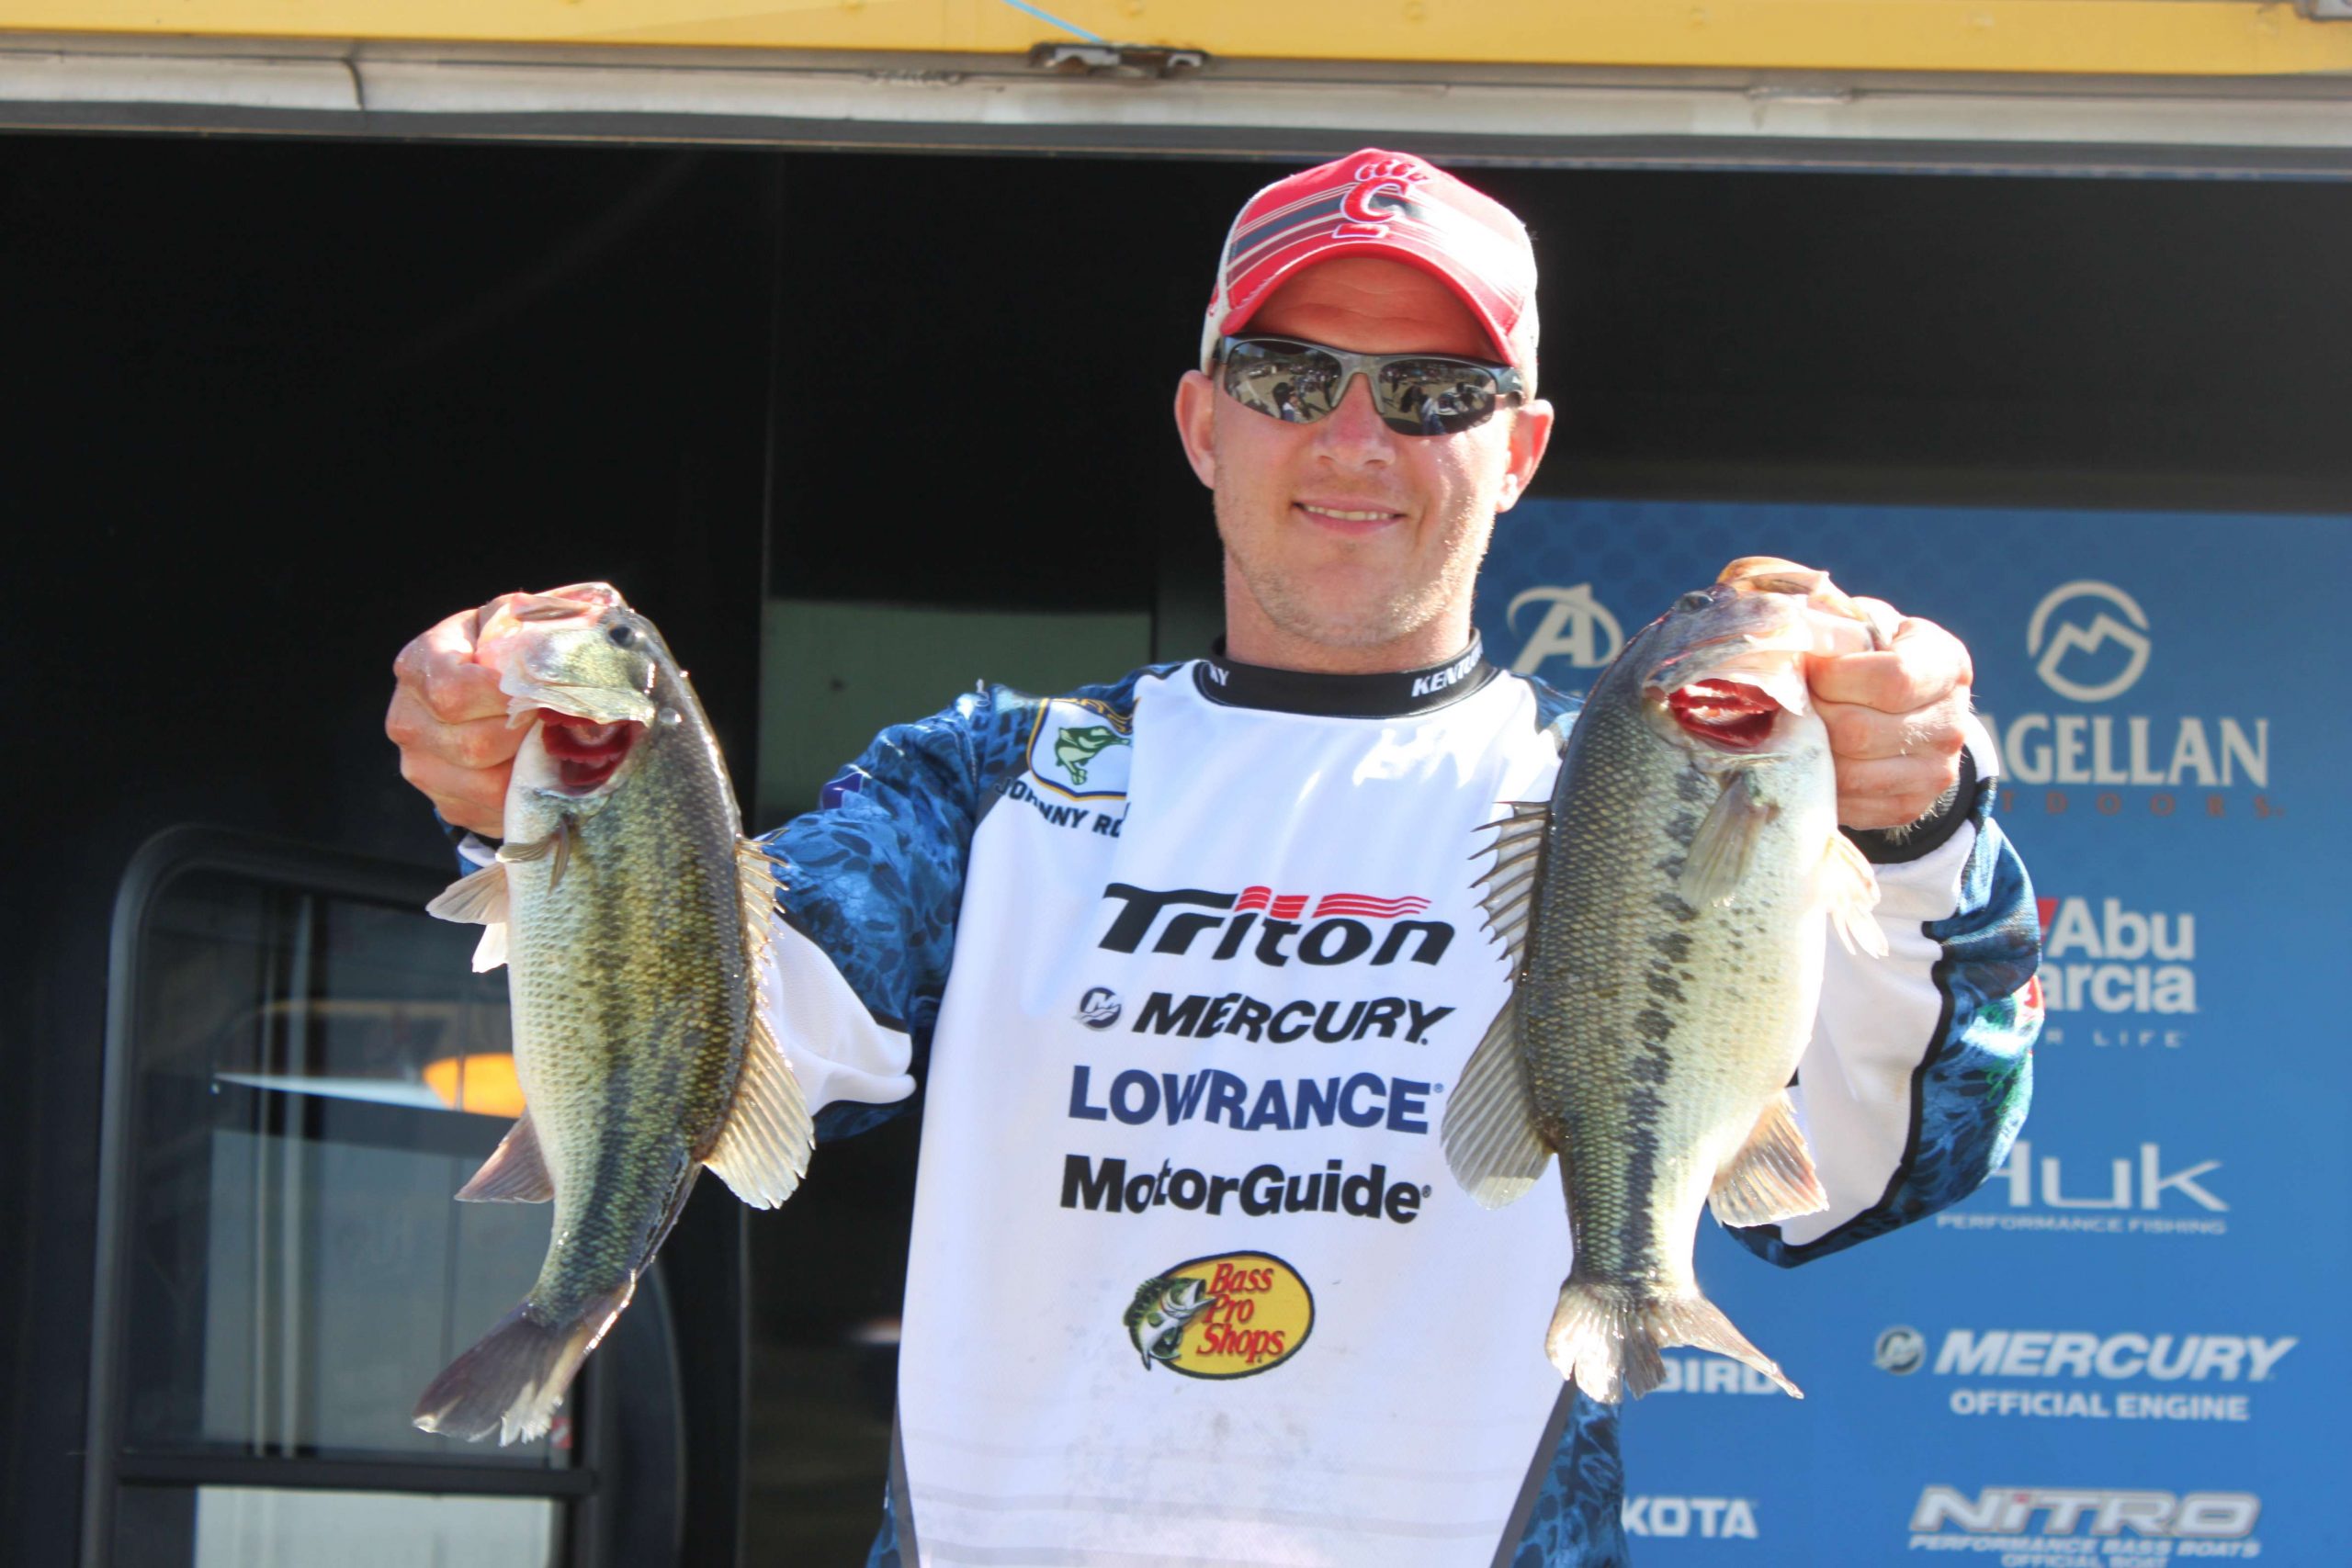  John Roth of Indiana is seventh among boaters with 32-13.
